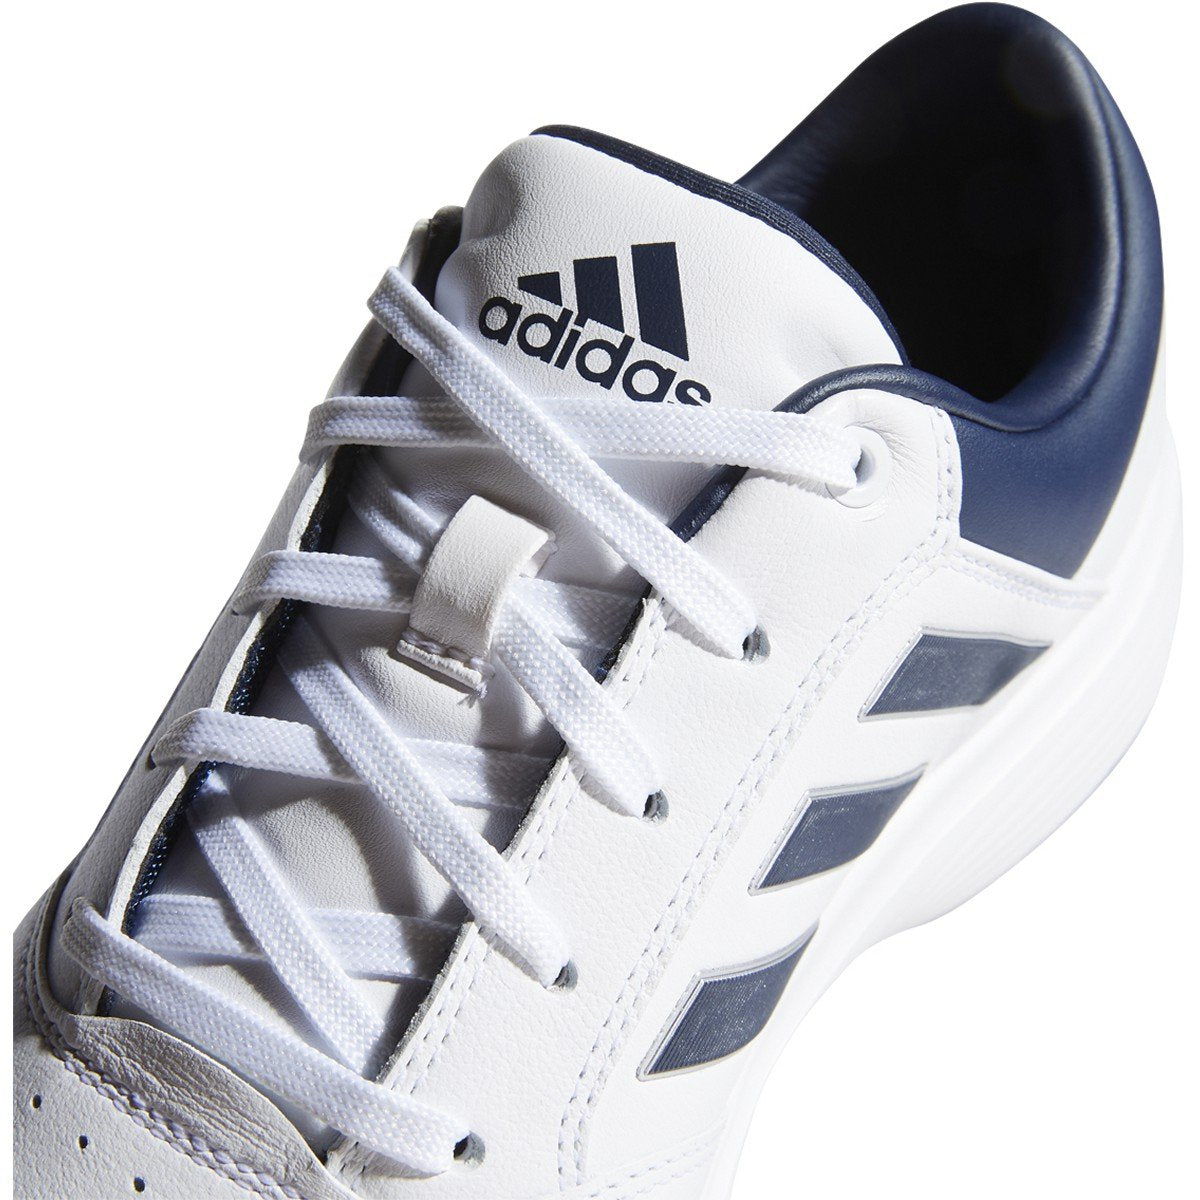 adidas 360 bounce 2.0 golf shoes review